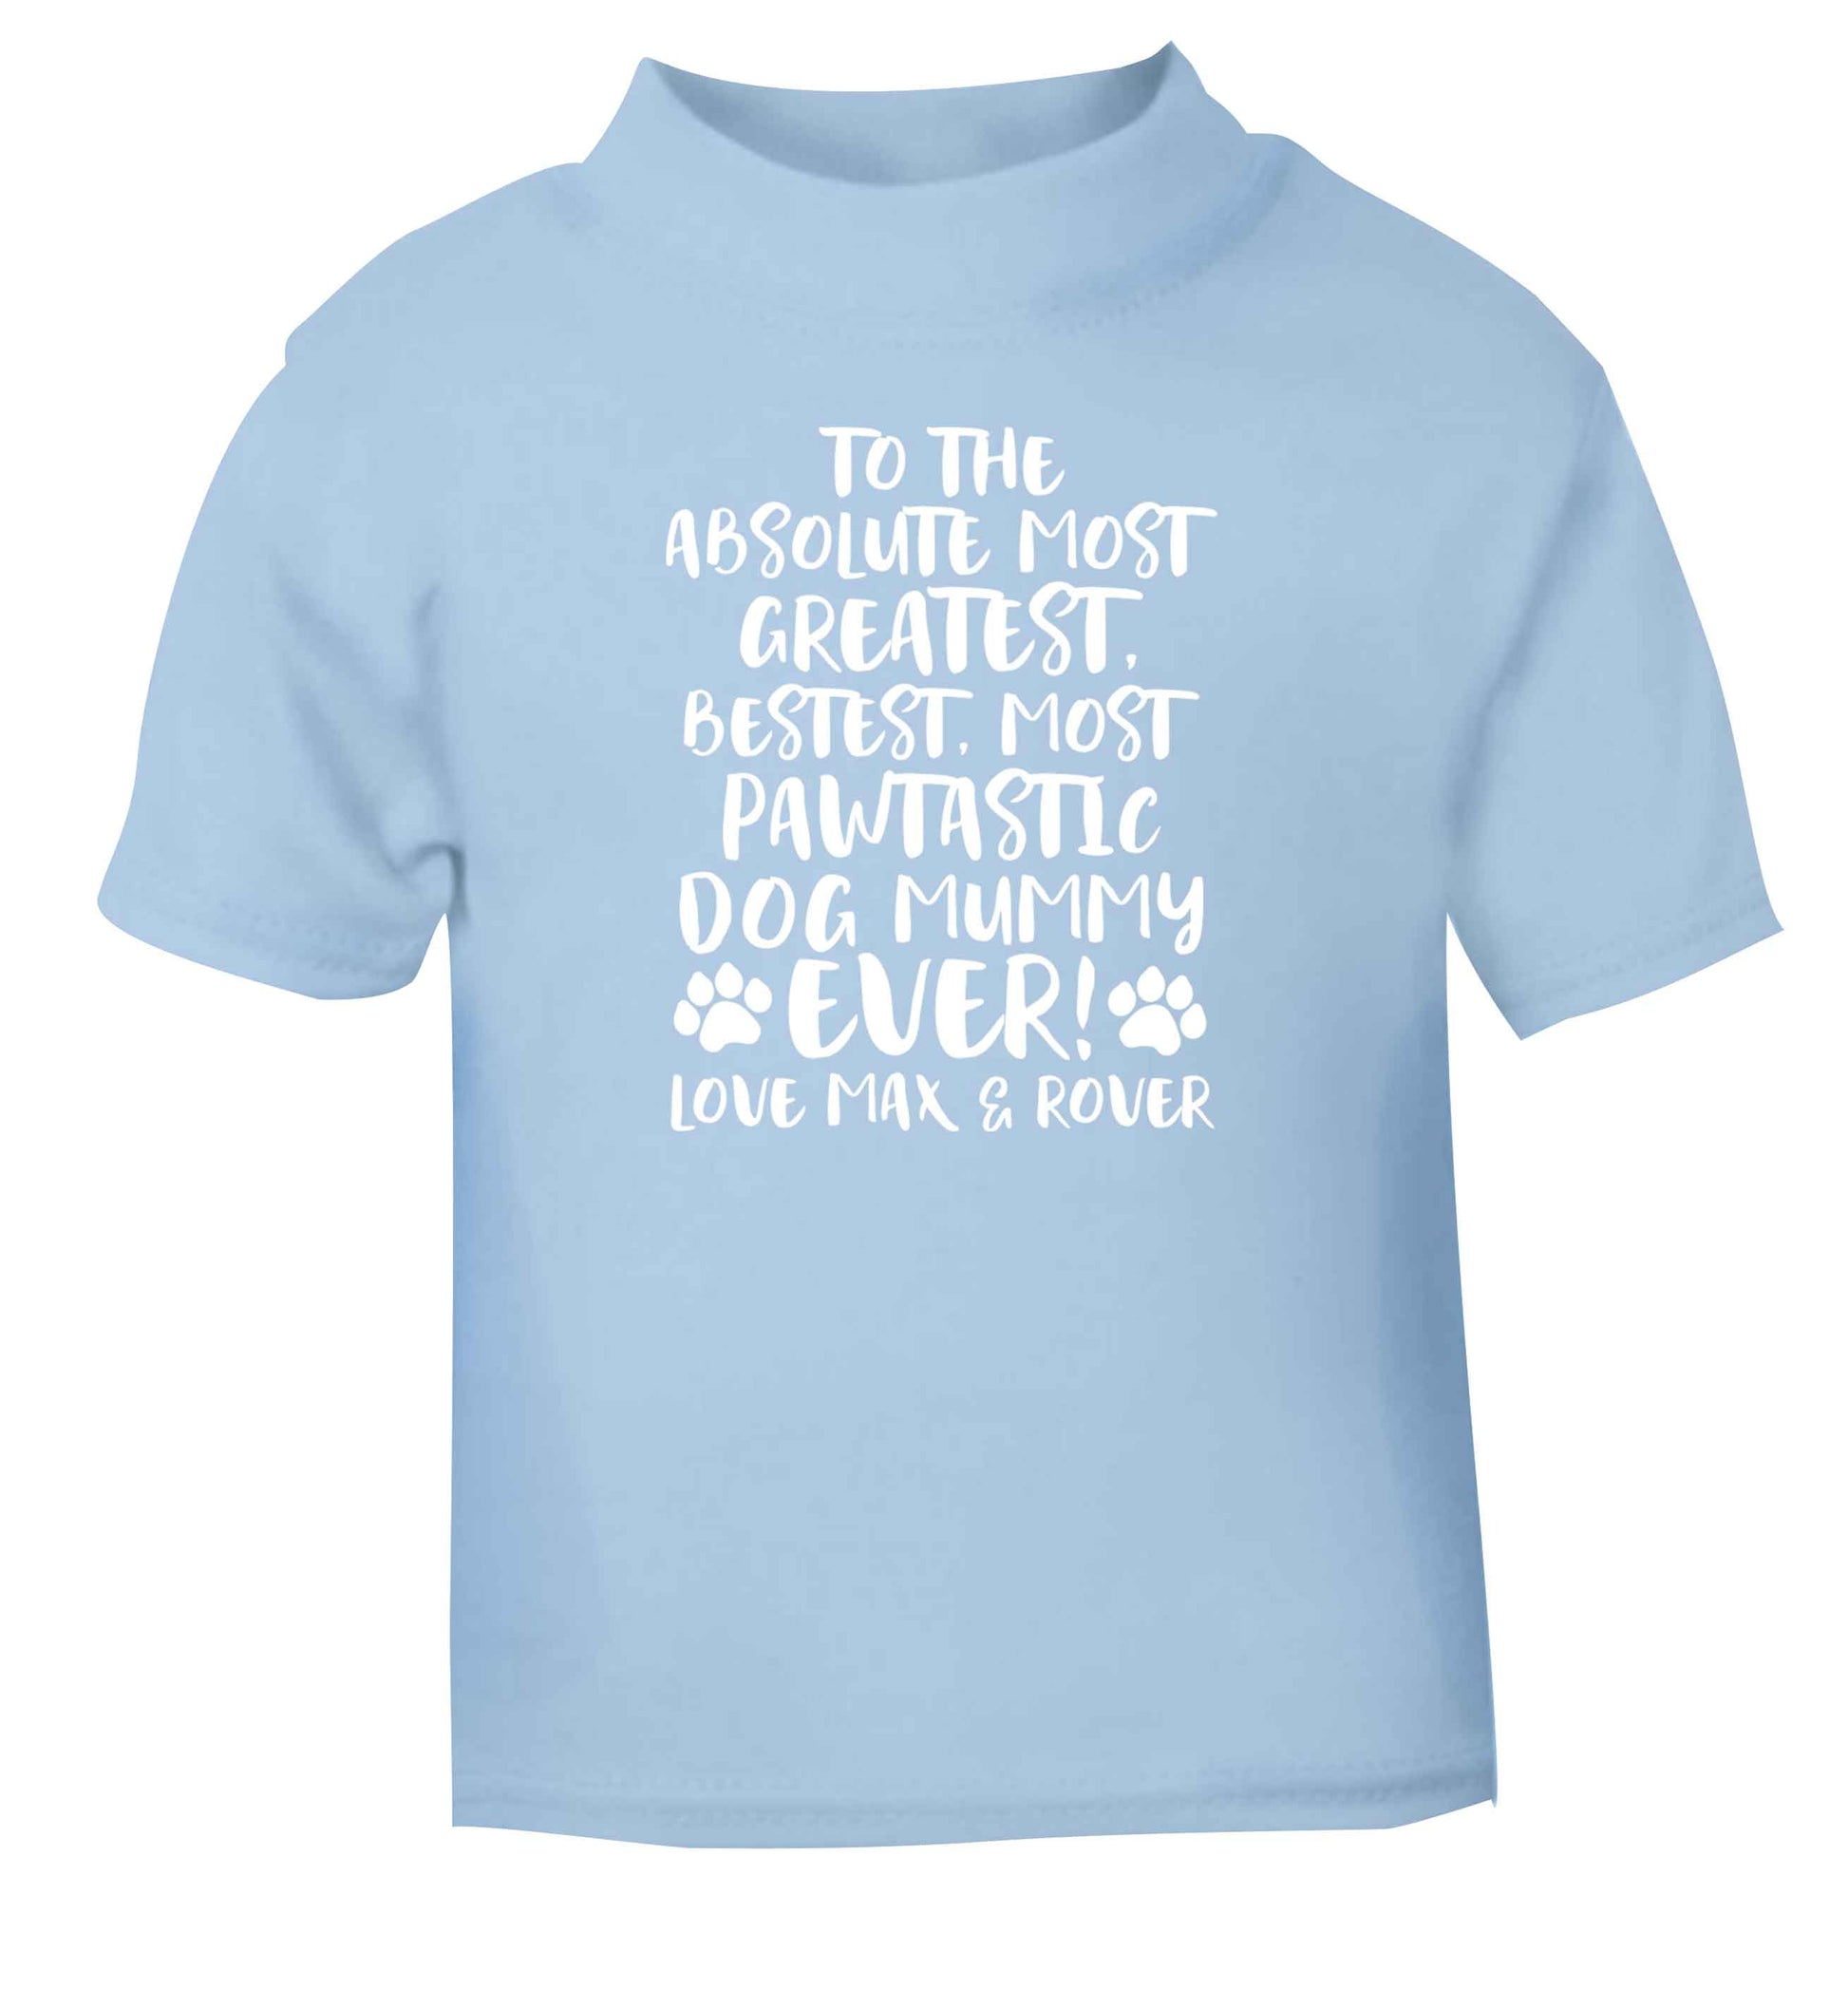 Personalsied to the most pawtastic dog mummy ever light blue Baby Toddler Tshirt 2 Years